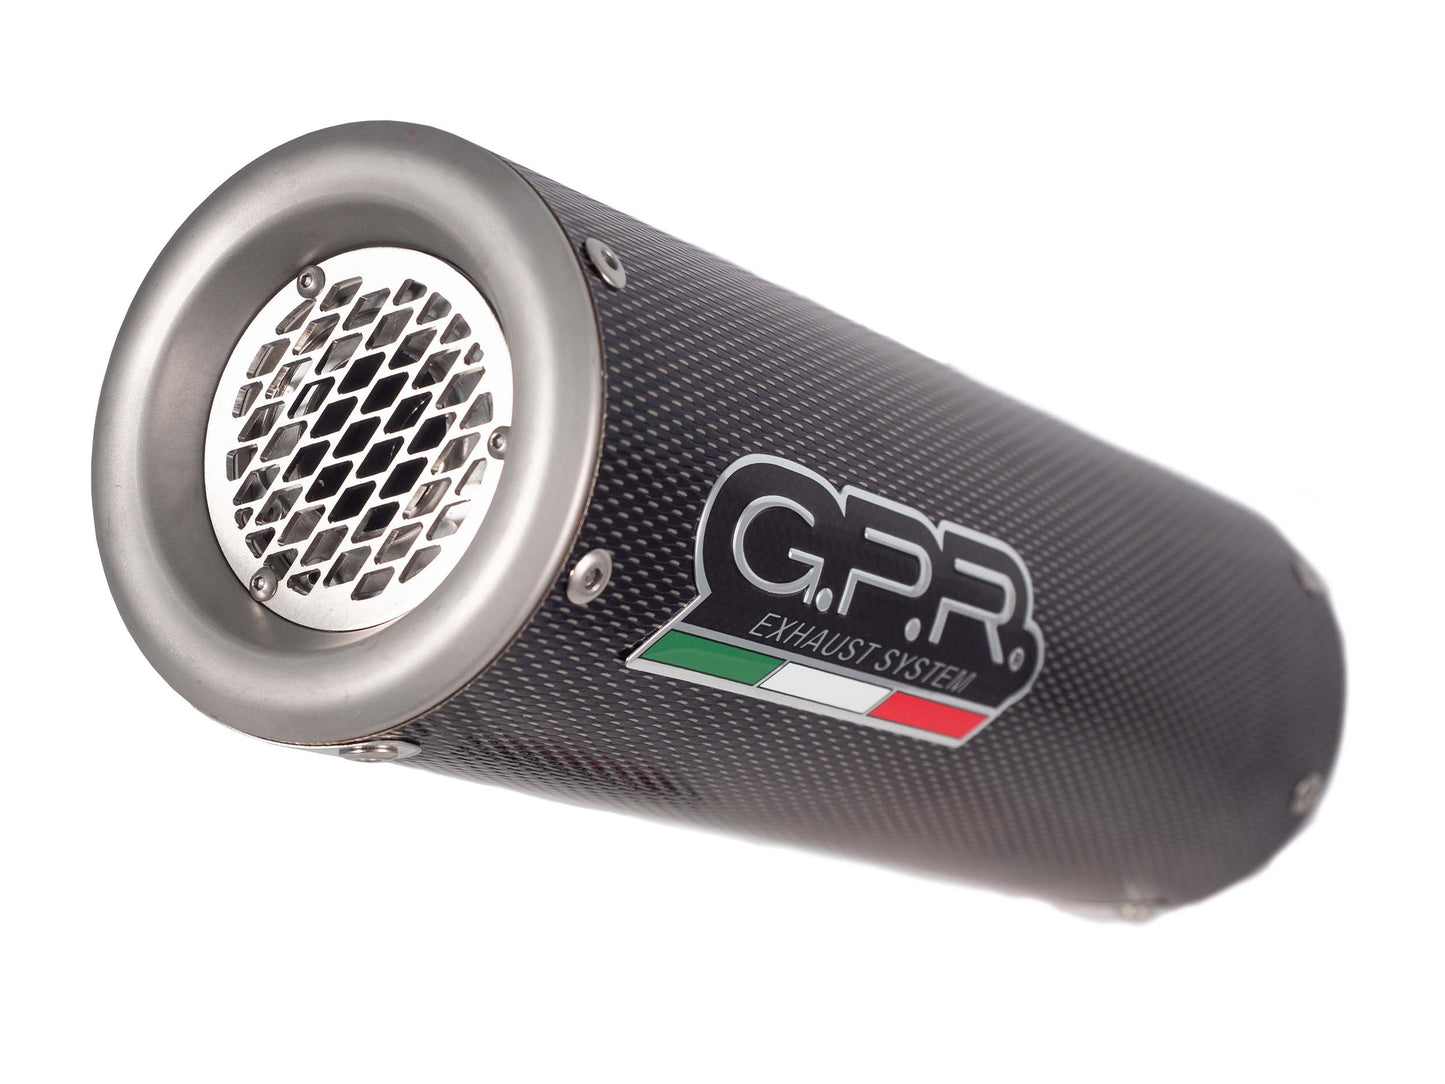 GPR Exhaust for Aprilia Tuono 1000 Rsvr 2002-2005, M3 Poppy , Slip-on Exhaust Including Removable DB Killer and Link Pipe